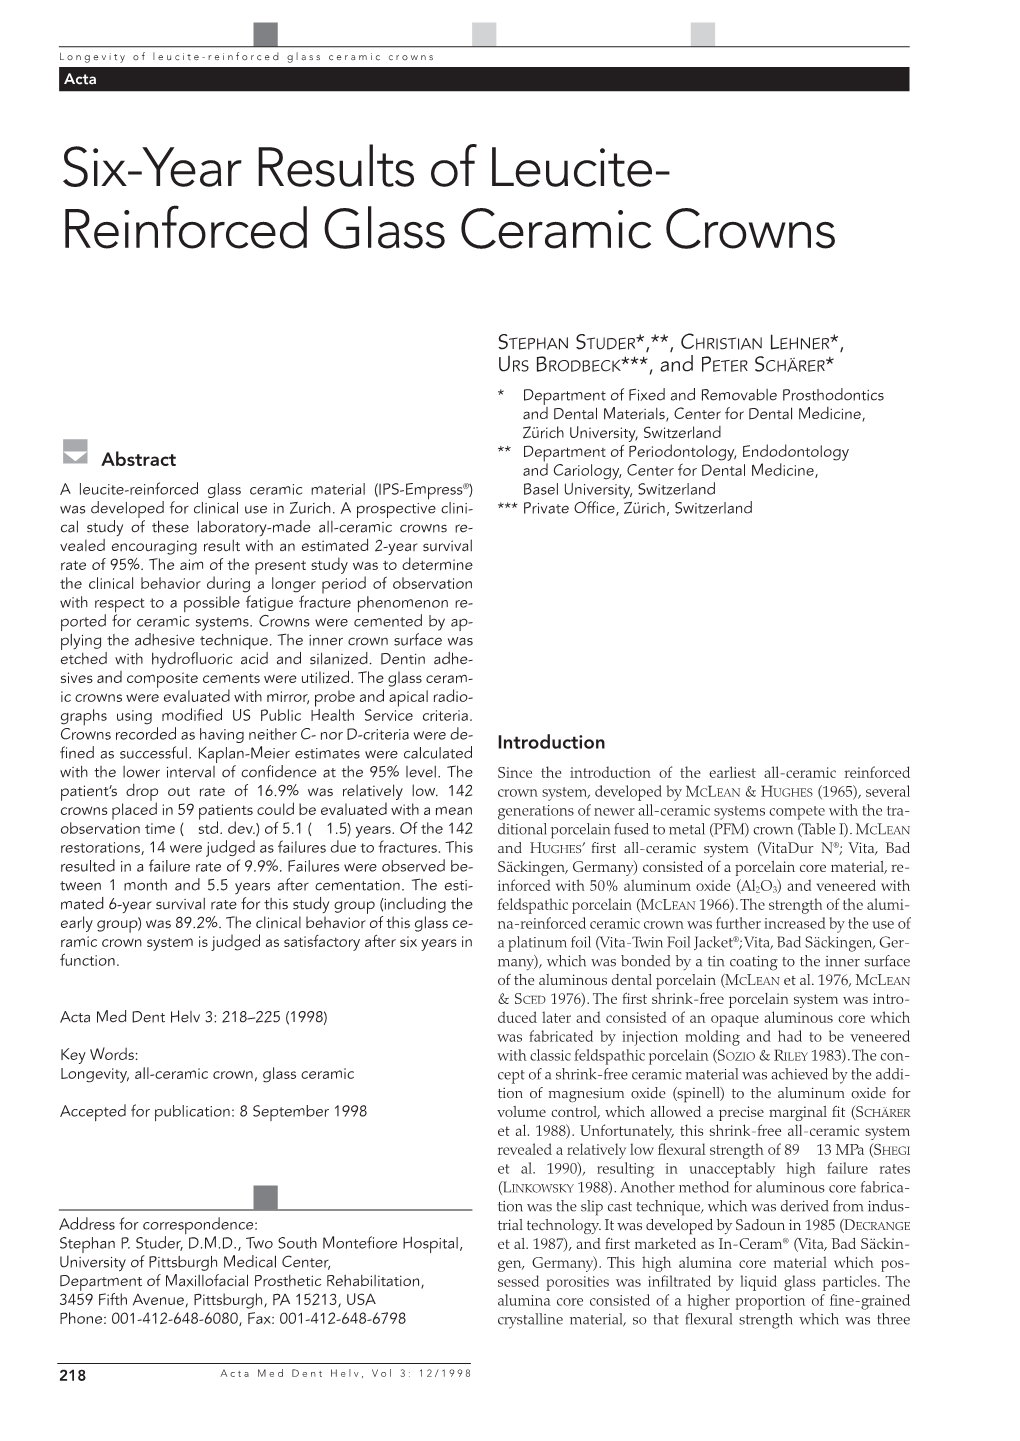 Six-Year Results of Leucite- Reinforced Glass Ceramic Crowns